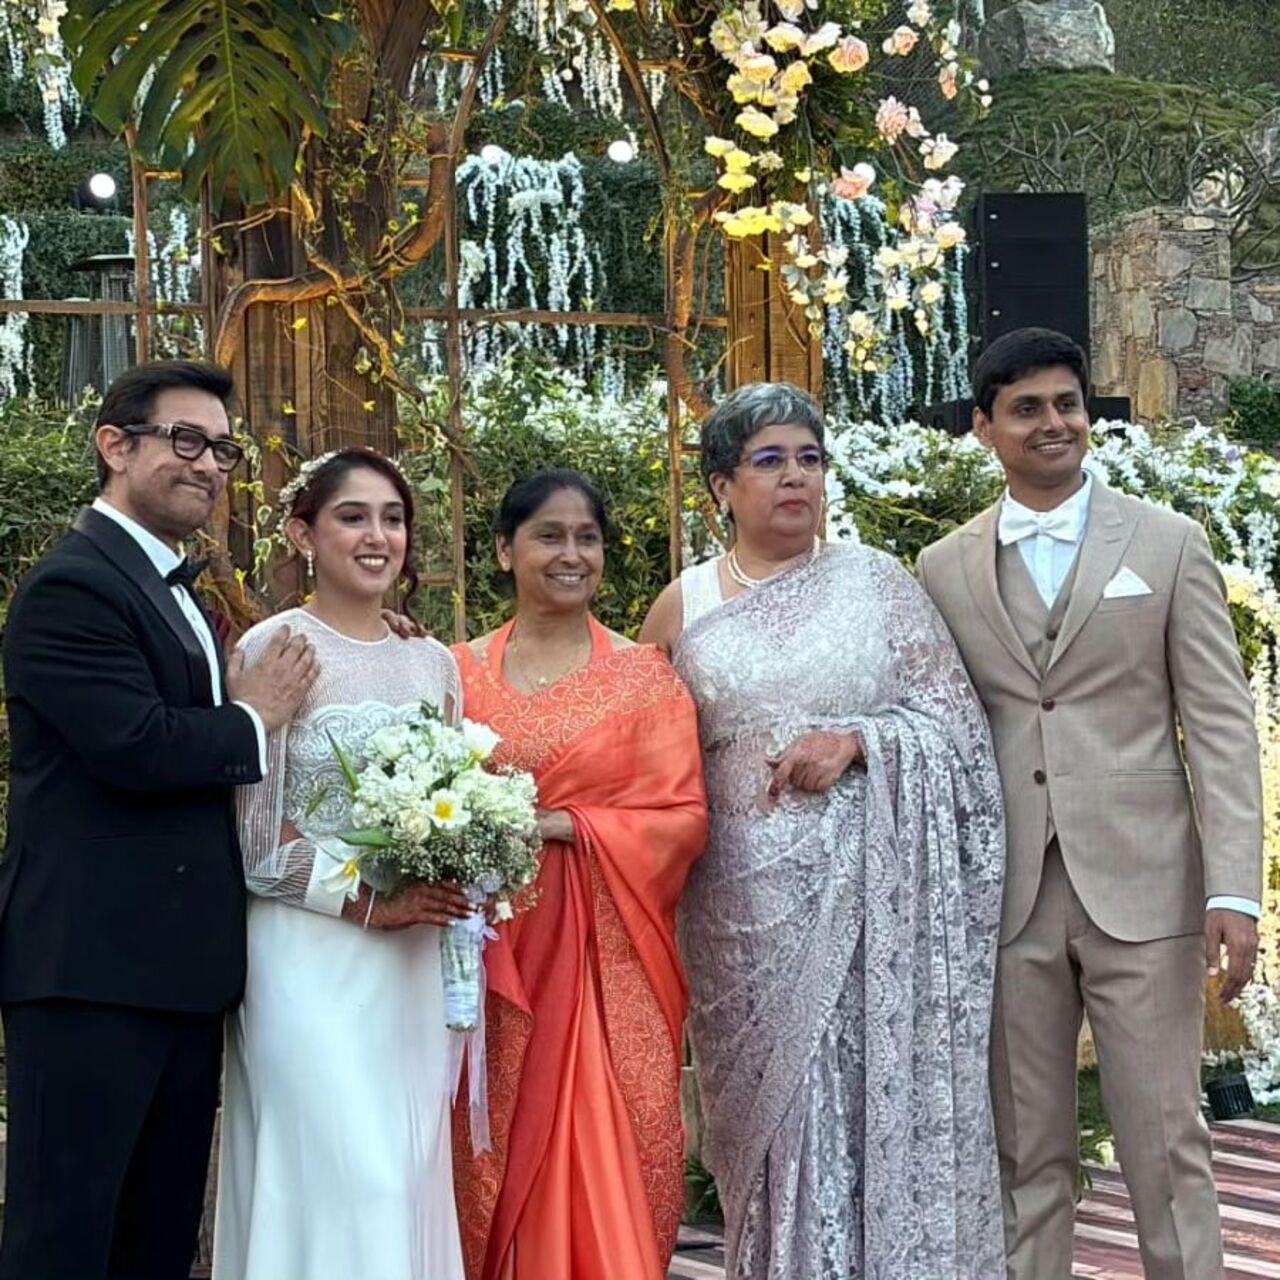 After their wedding, the parents came to bless the newlyweds. Ira's parents Reena Dutta and Aamir Khan along with Nupur's mother posed for a family picture after the ceremony